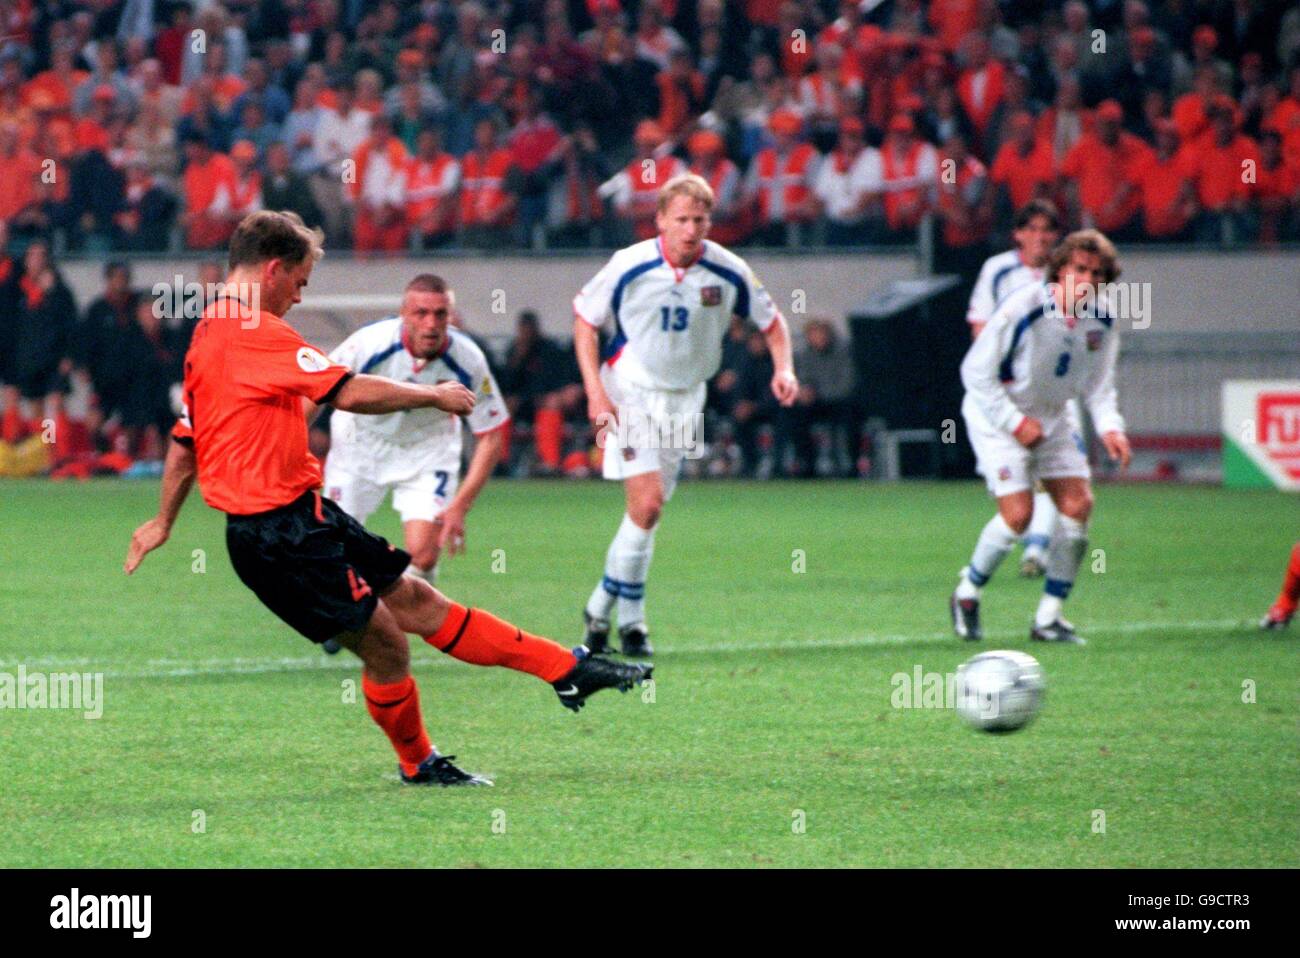 Soccer - Euro 2000 - Group D - Holland v Czech Republic. Holland's Frank De Boer scores the winning goal in the 89th minute from the penalty spot Stock Photo